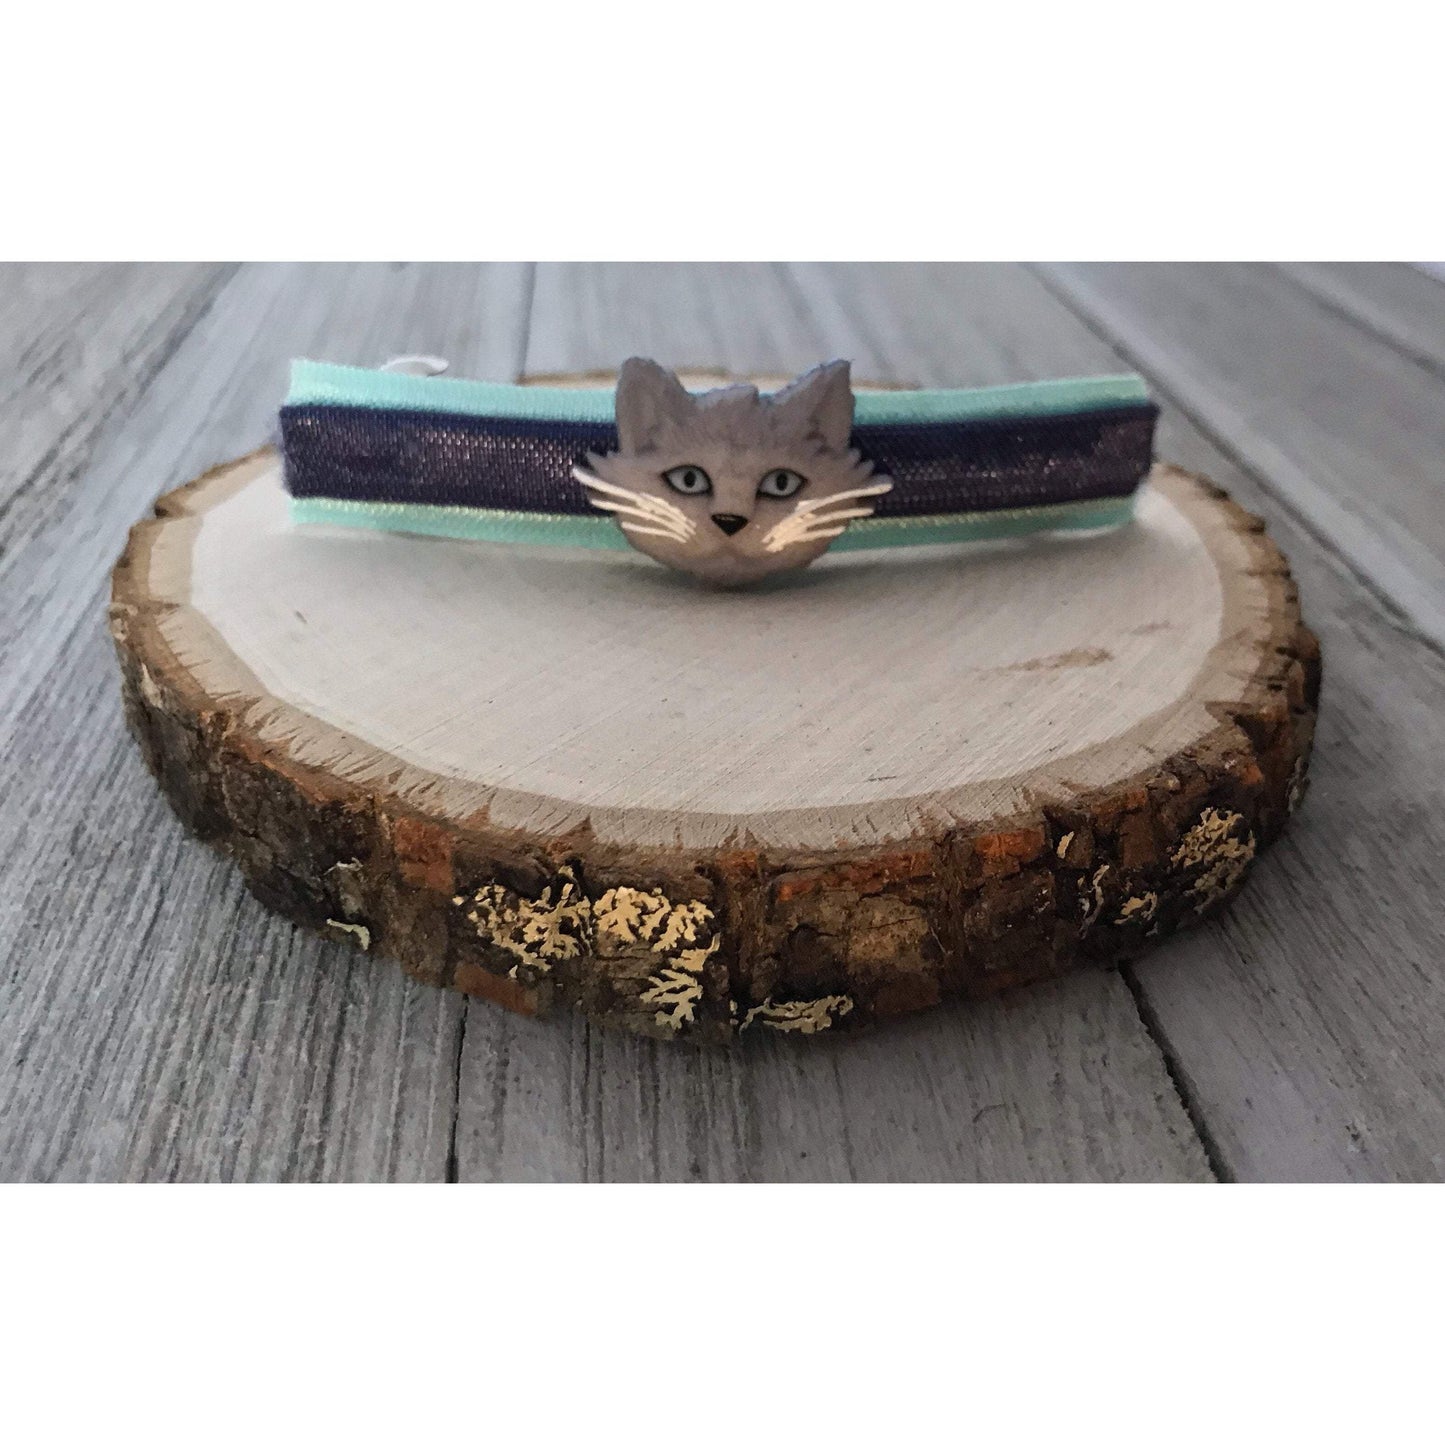 Gray Cat with Blue Hair Clip - Adorable Feline-Inspired Accessory